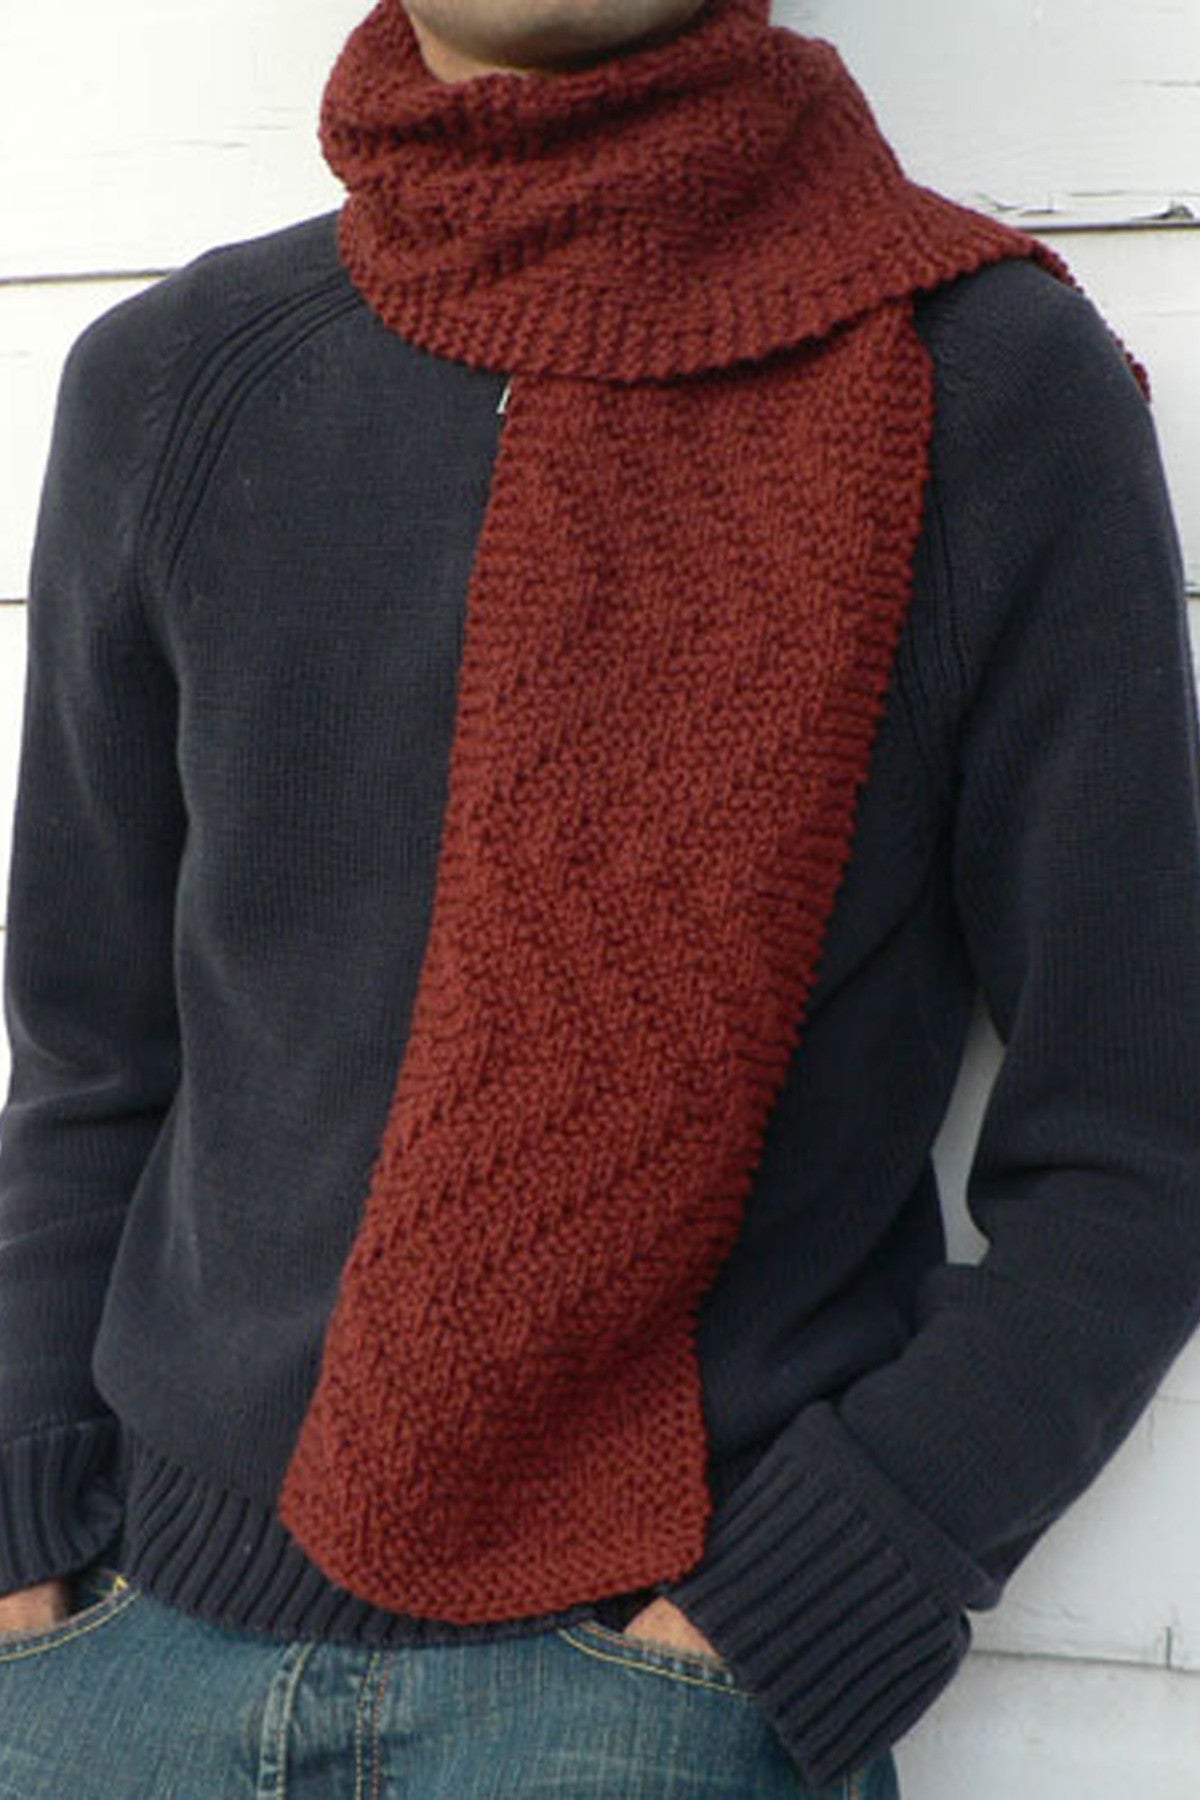 Knitting pattern for mens scarf